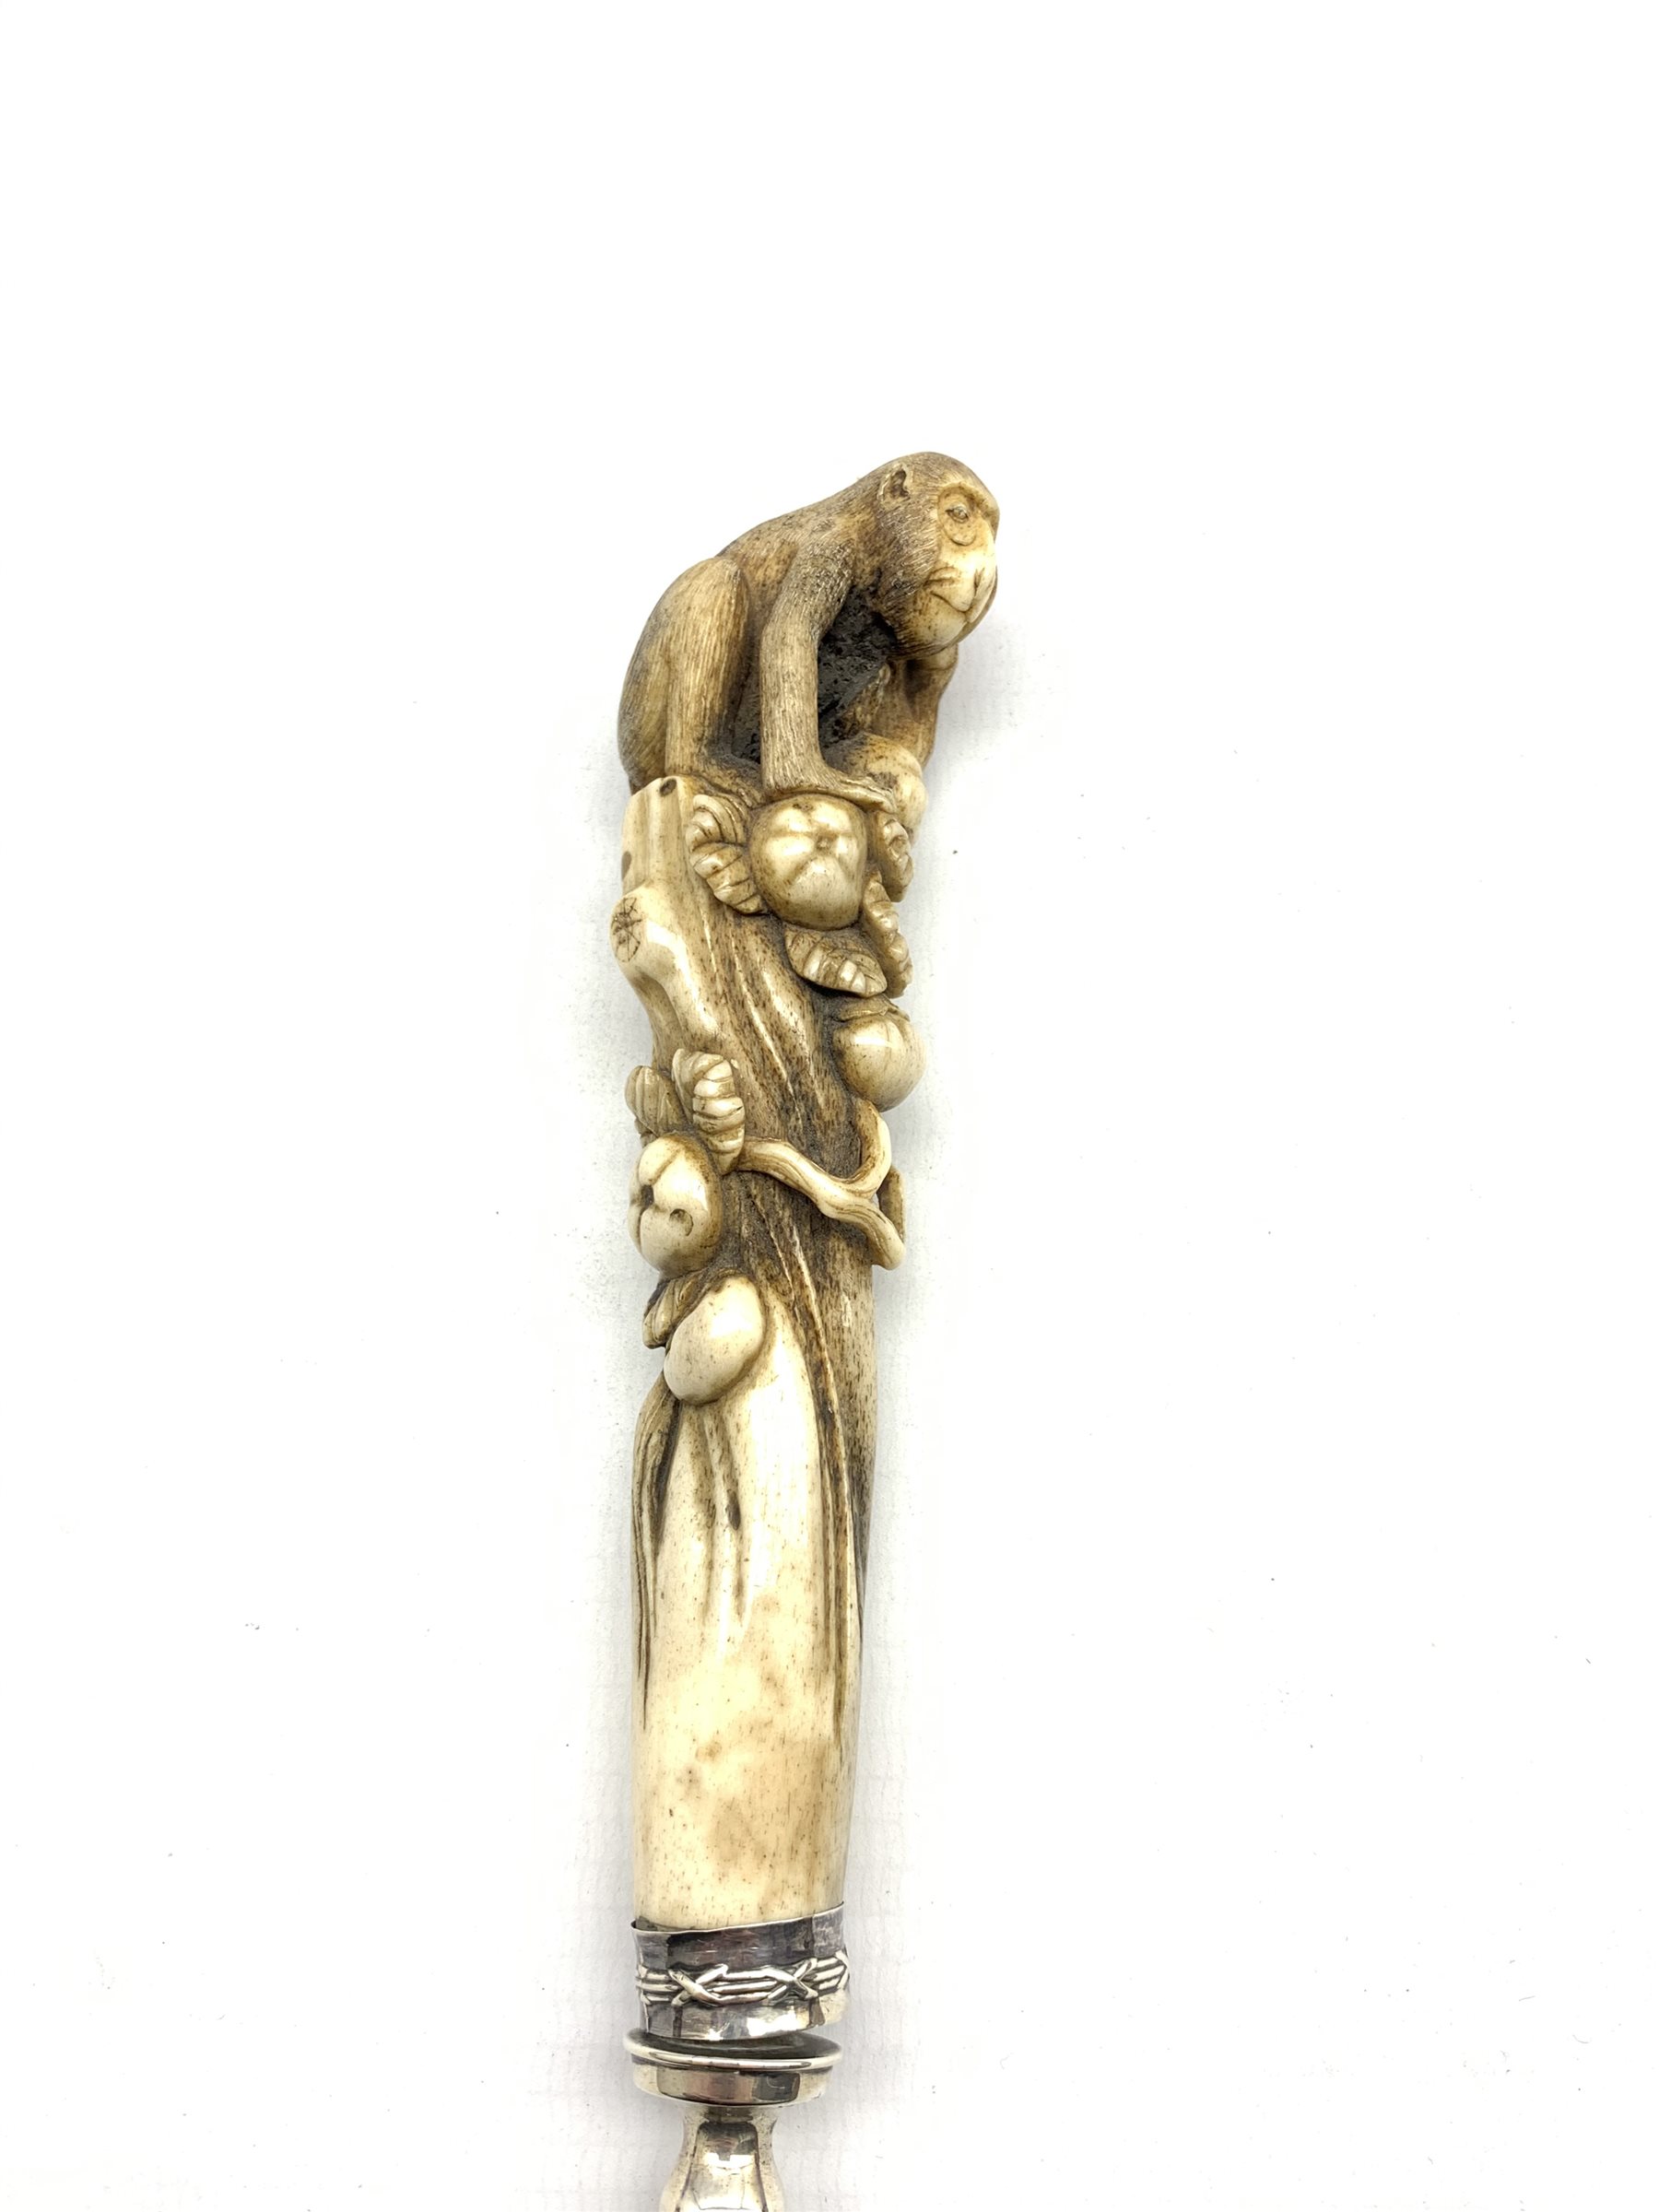 Edwardian silver and bone letter opener, the handle finely carved as a Monkey gathering fruit by Jam - Image 2 of 6